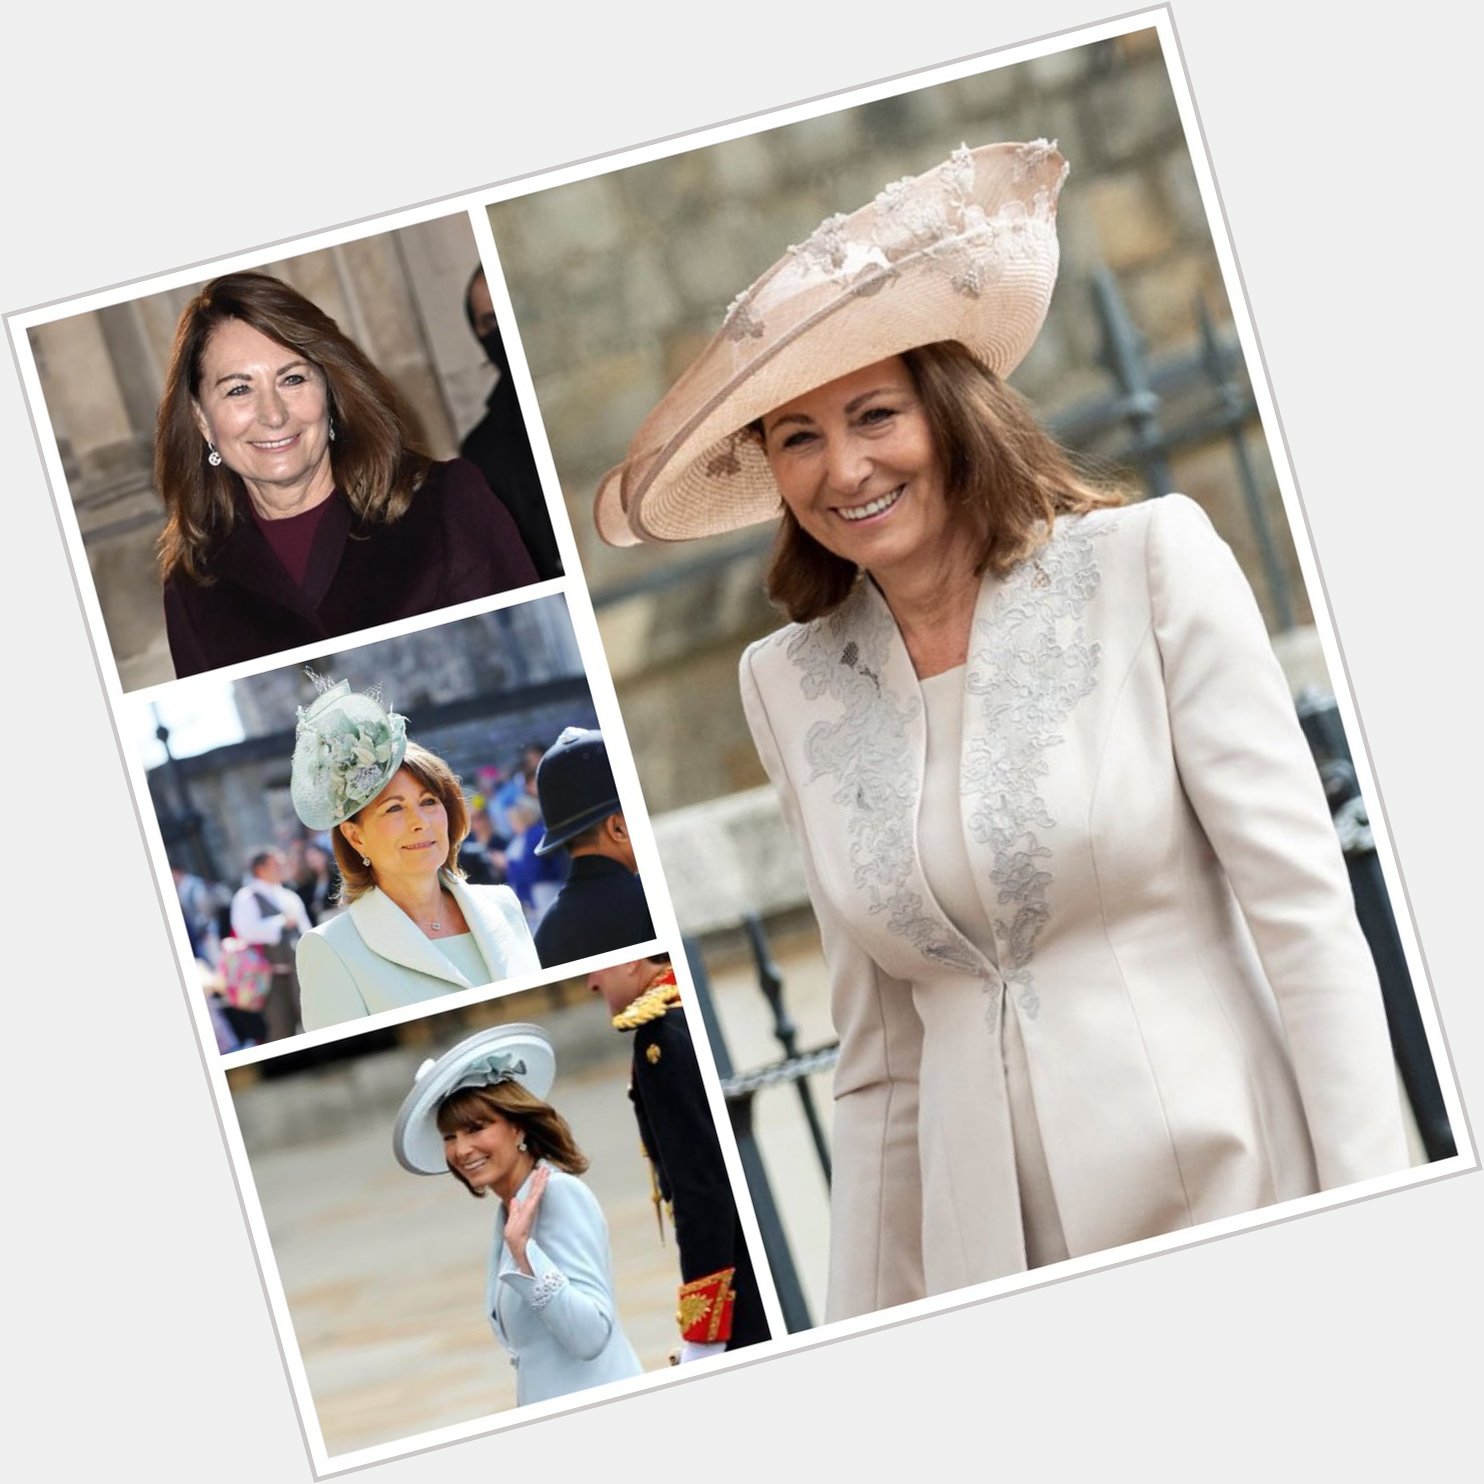 Wishing the lovely Carole Middleton, a very happy birthday 